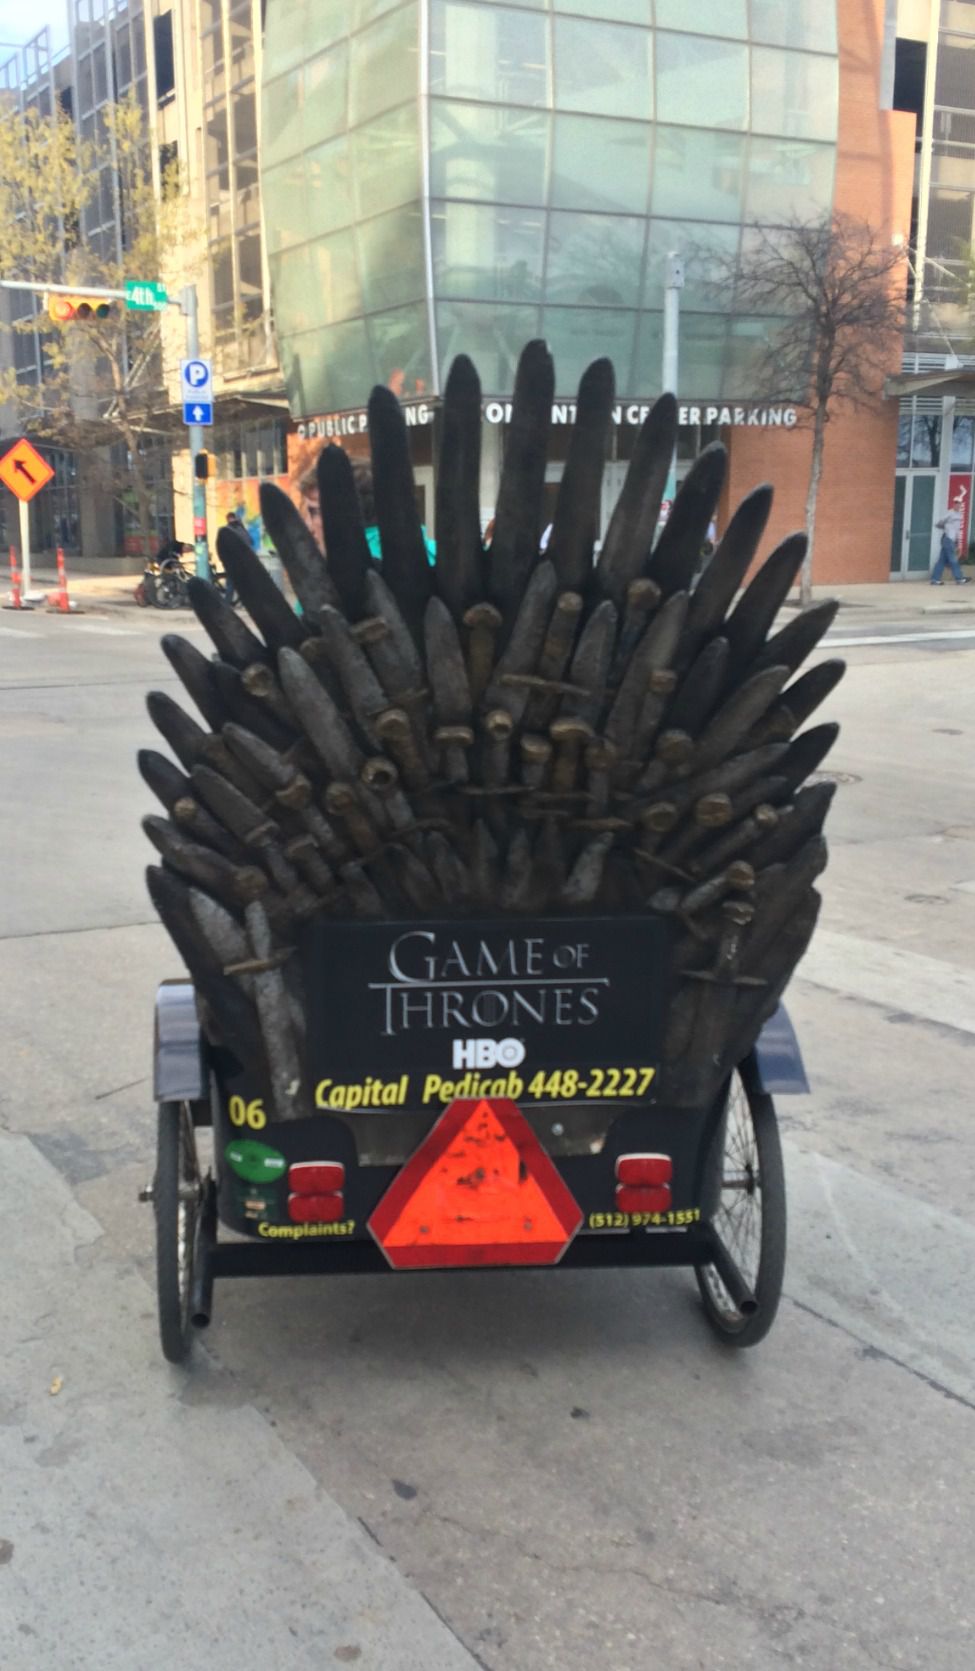  A “Game of Thrones”-inspired pedicab in Austin